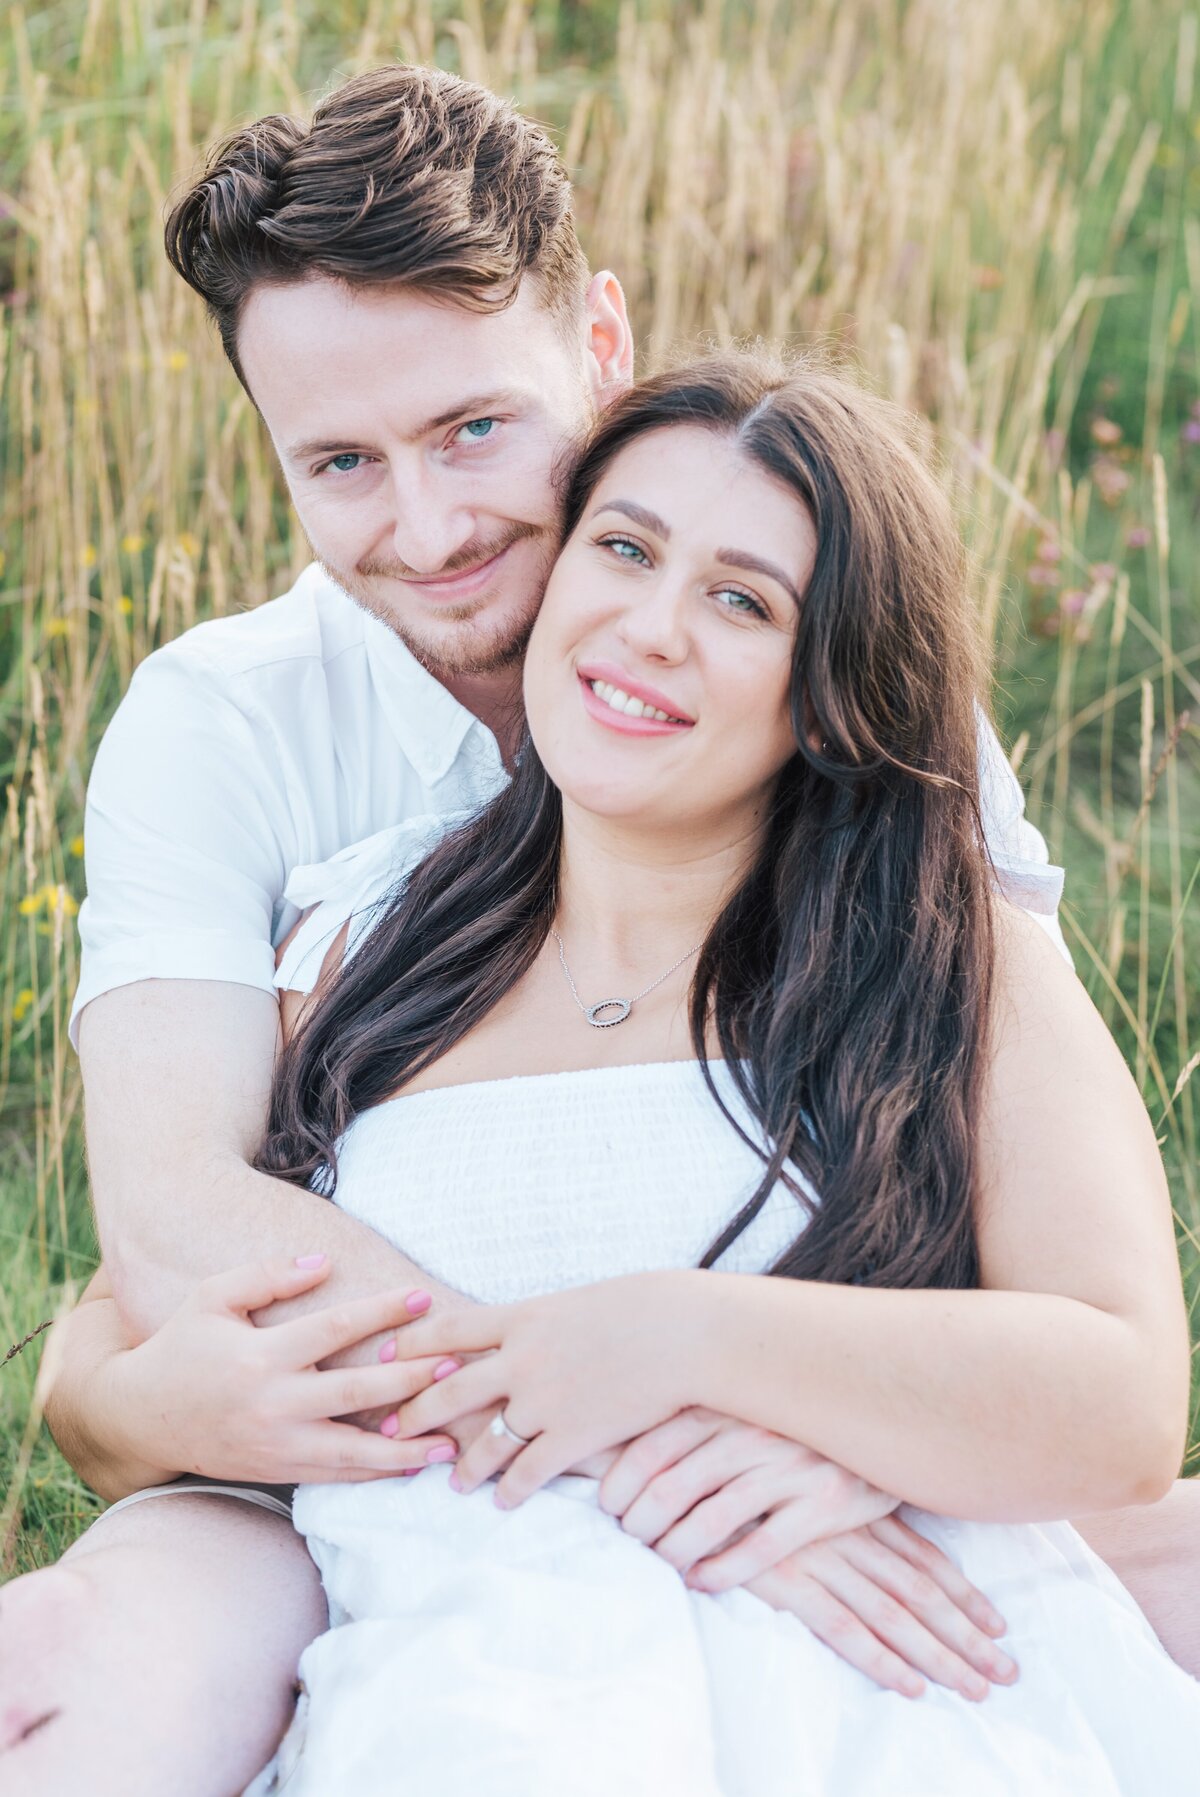 The couple are sitting in a field with long grass around them, the man is behind the lady and his arms around her, they are cuddling and smiling at the camera,